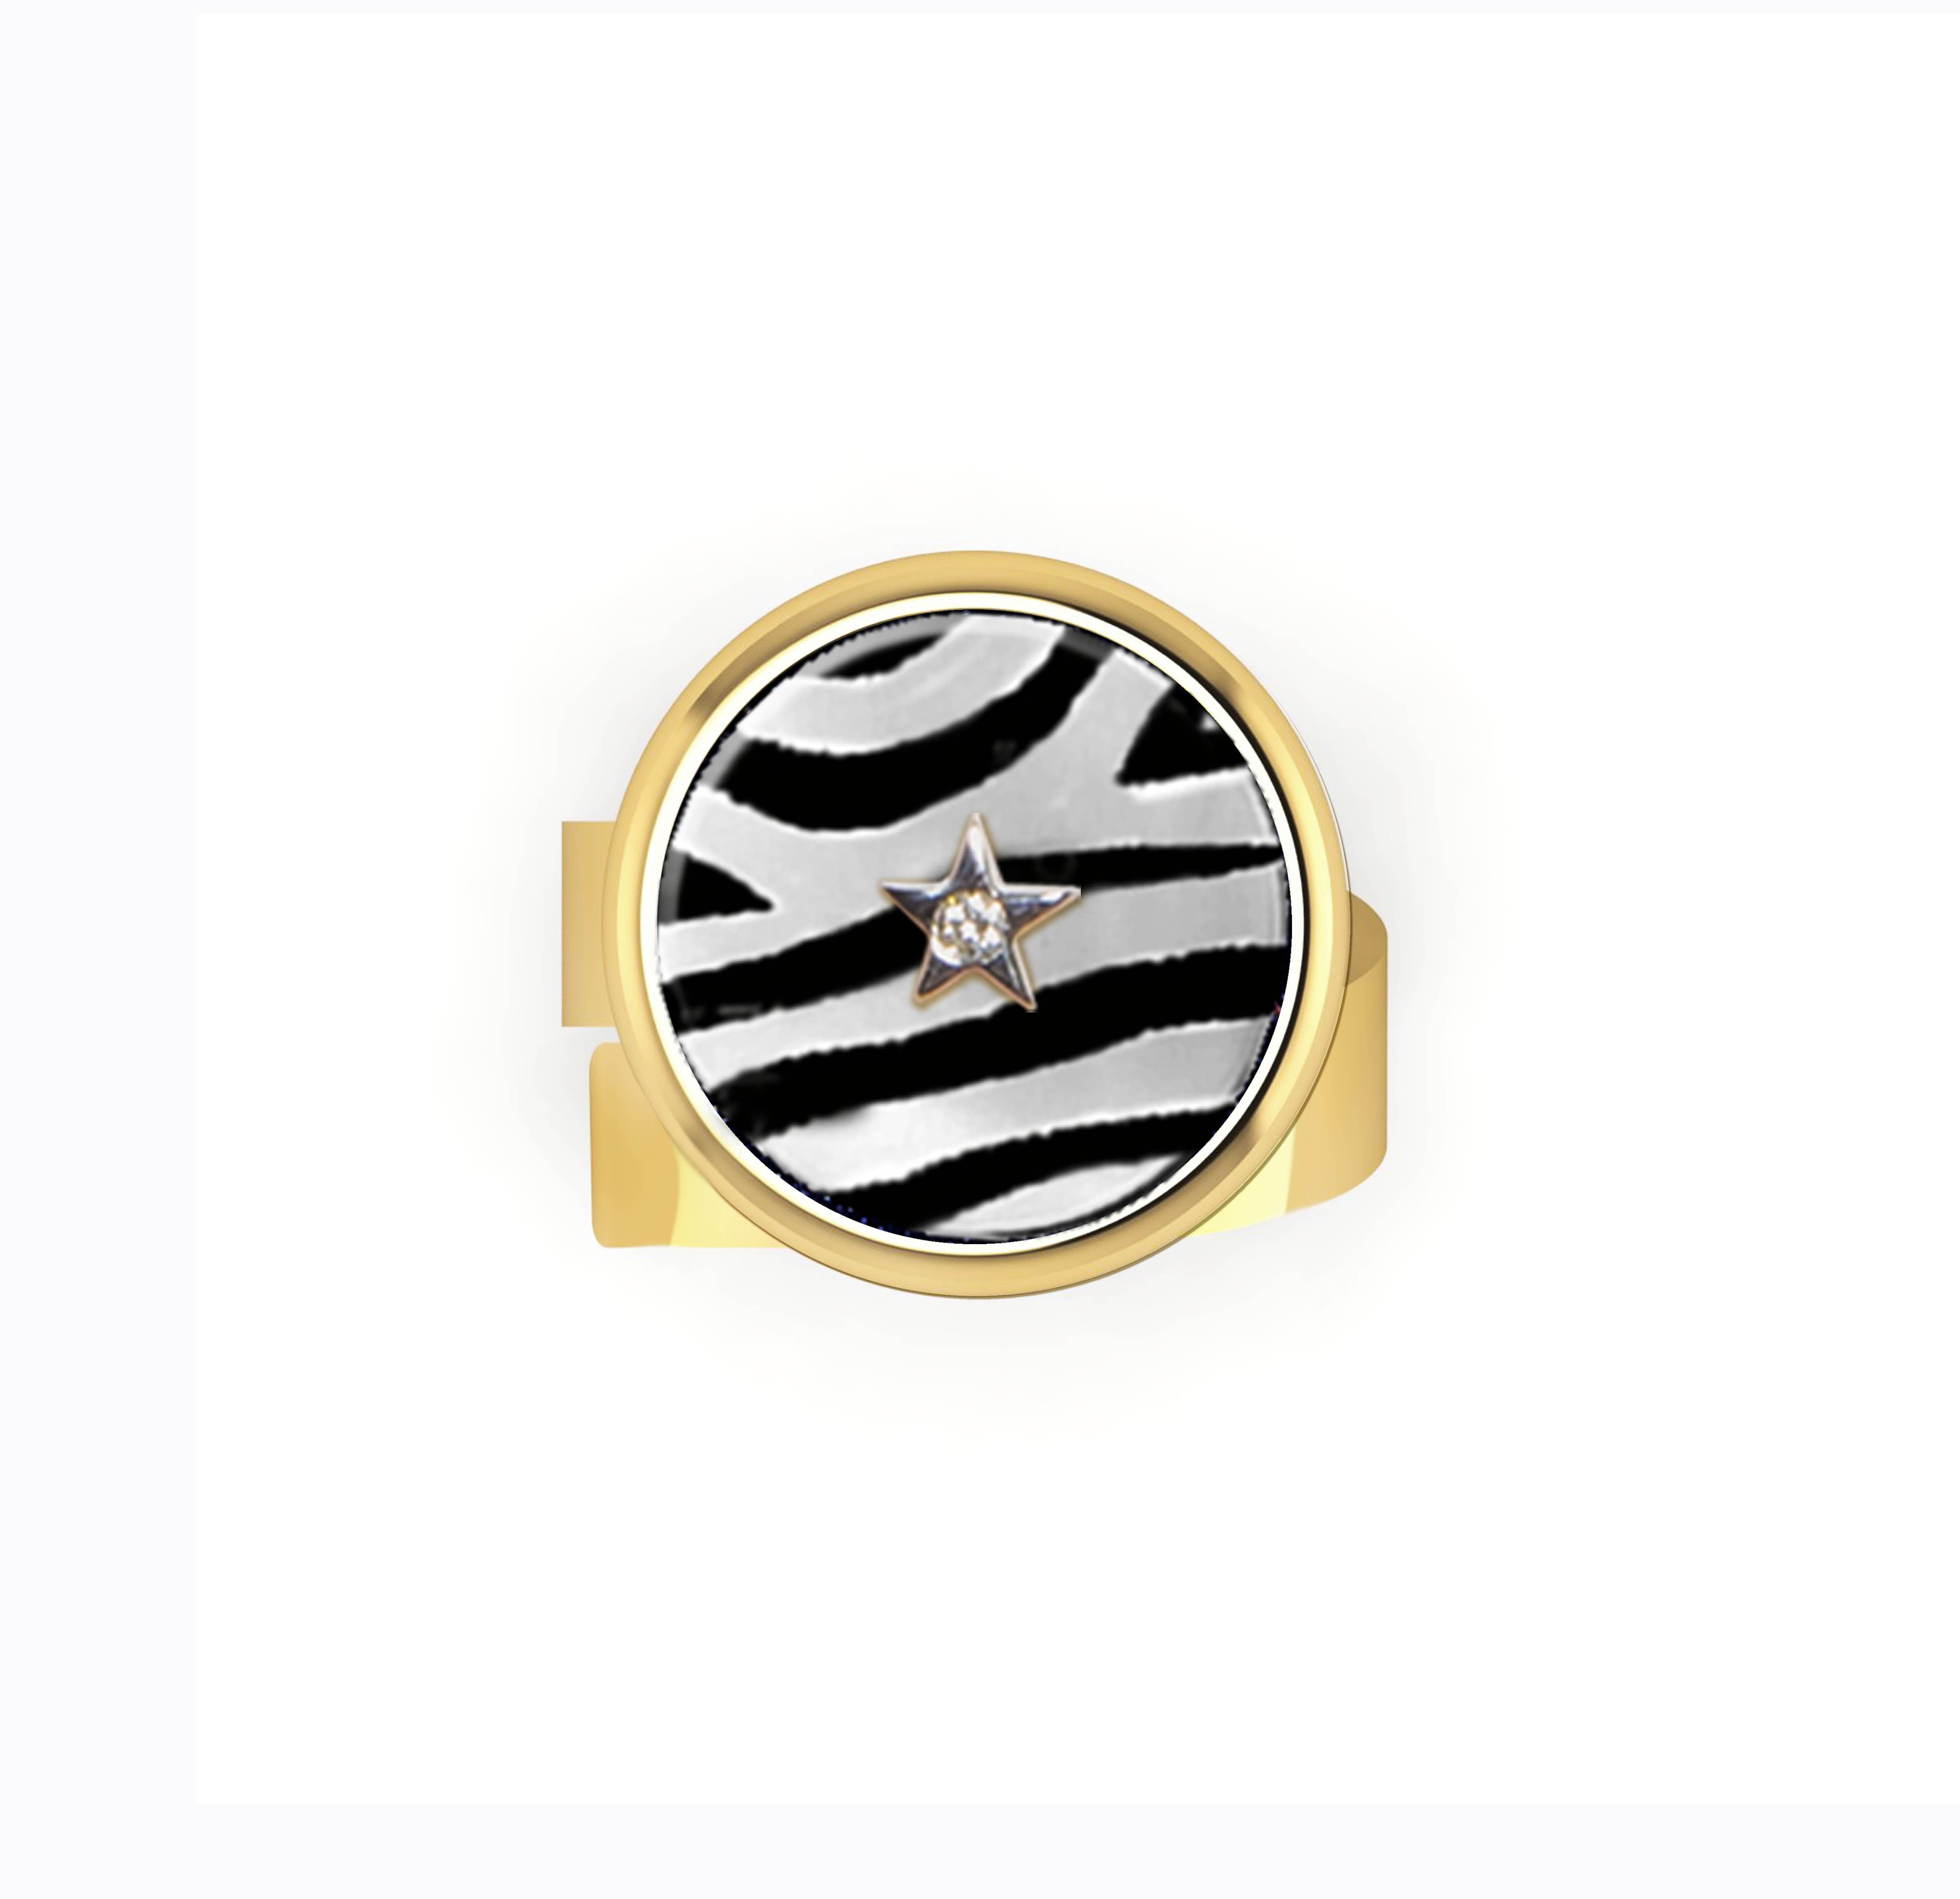 ART WILD COLLECTION- Zebra Style_ Black Stripes Hand Painted on White hard stone- Diamond 0,01 ct on white gold star at the centre.
Excellent Craftmanship made in Italy, each piece is unique. The size can be adjustable as the ring is open.